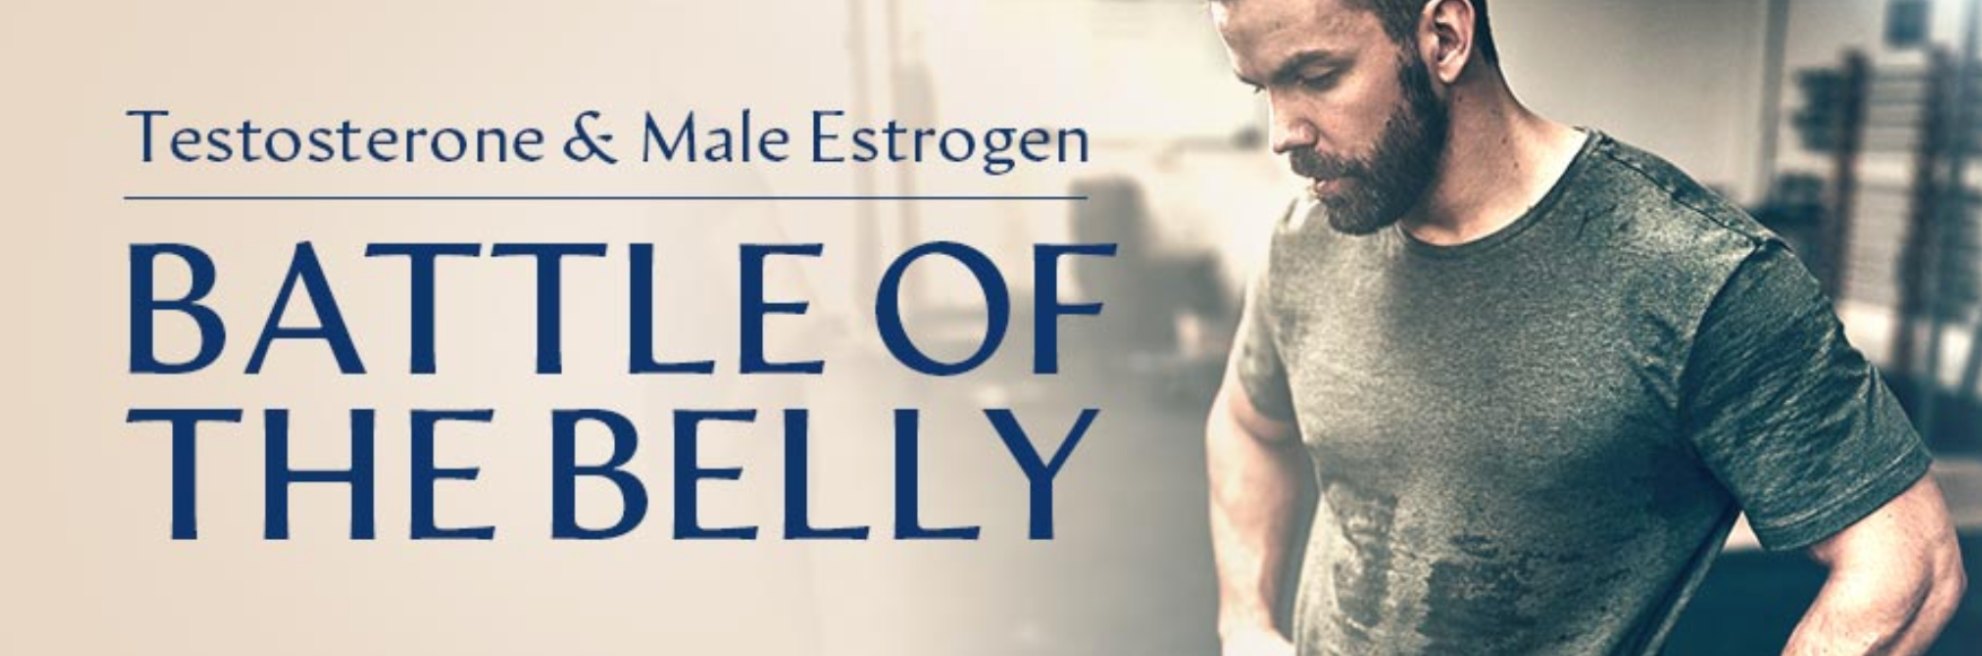 The Battle Of The Belly — Testosterone, Aromatase & Male Estrogen